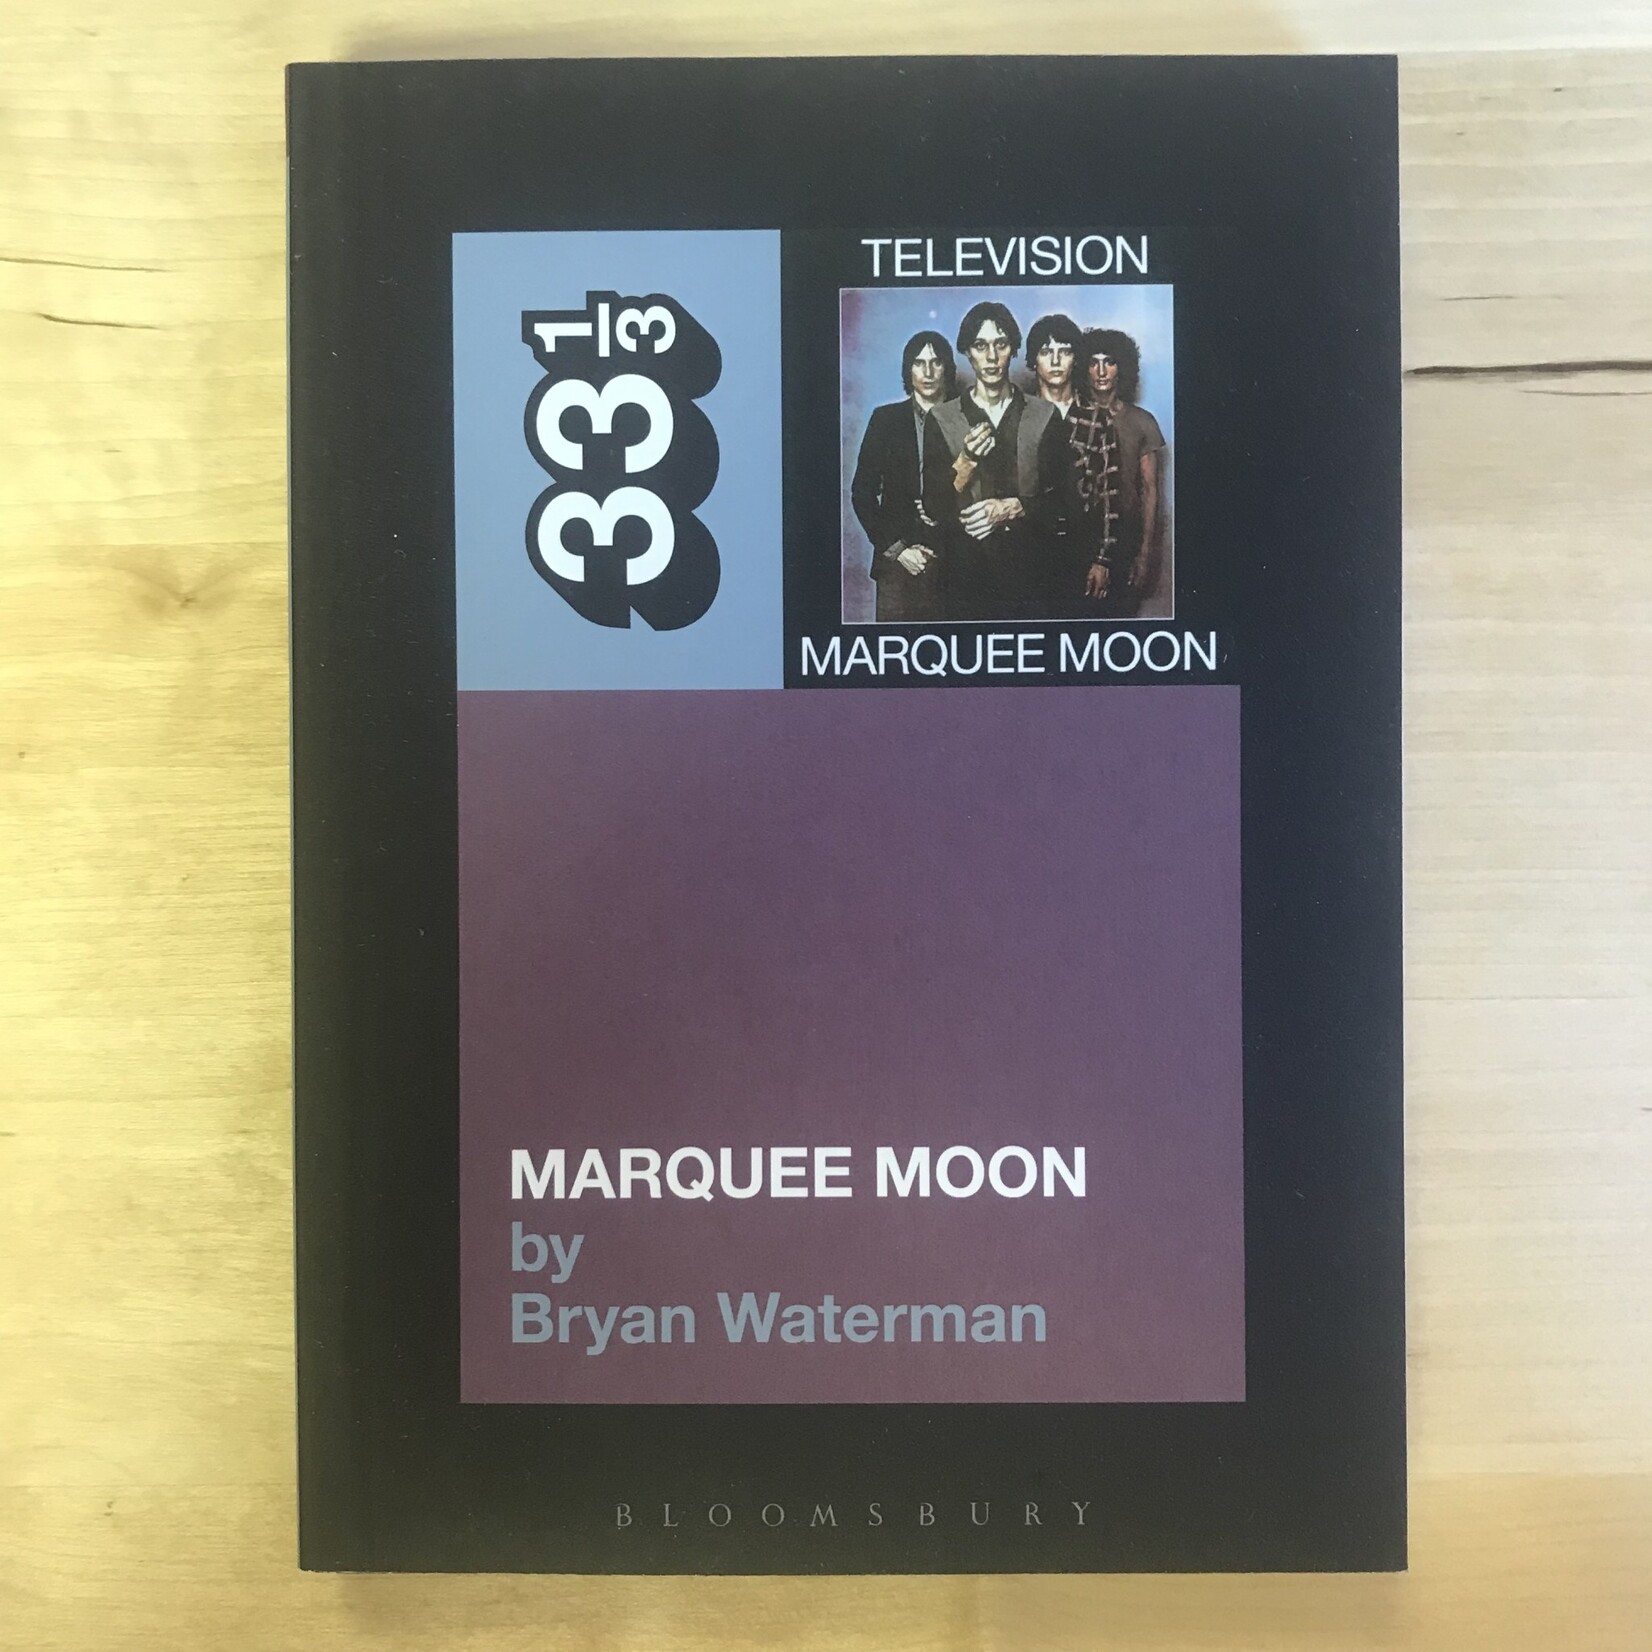 Bryan Waterman - 33 1/3 #83 - Television: Marquee Moon - Paperback (NEW)